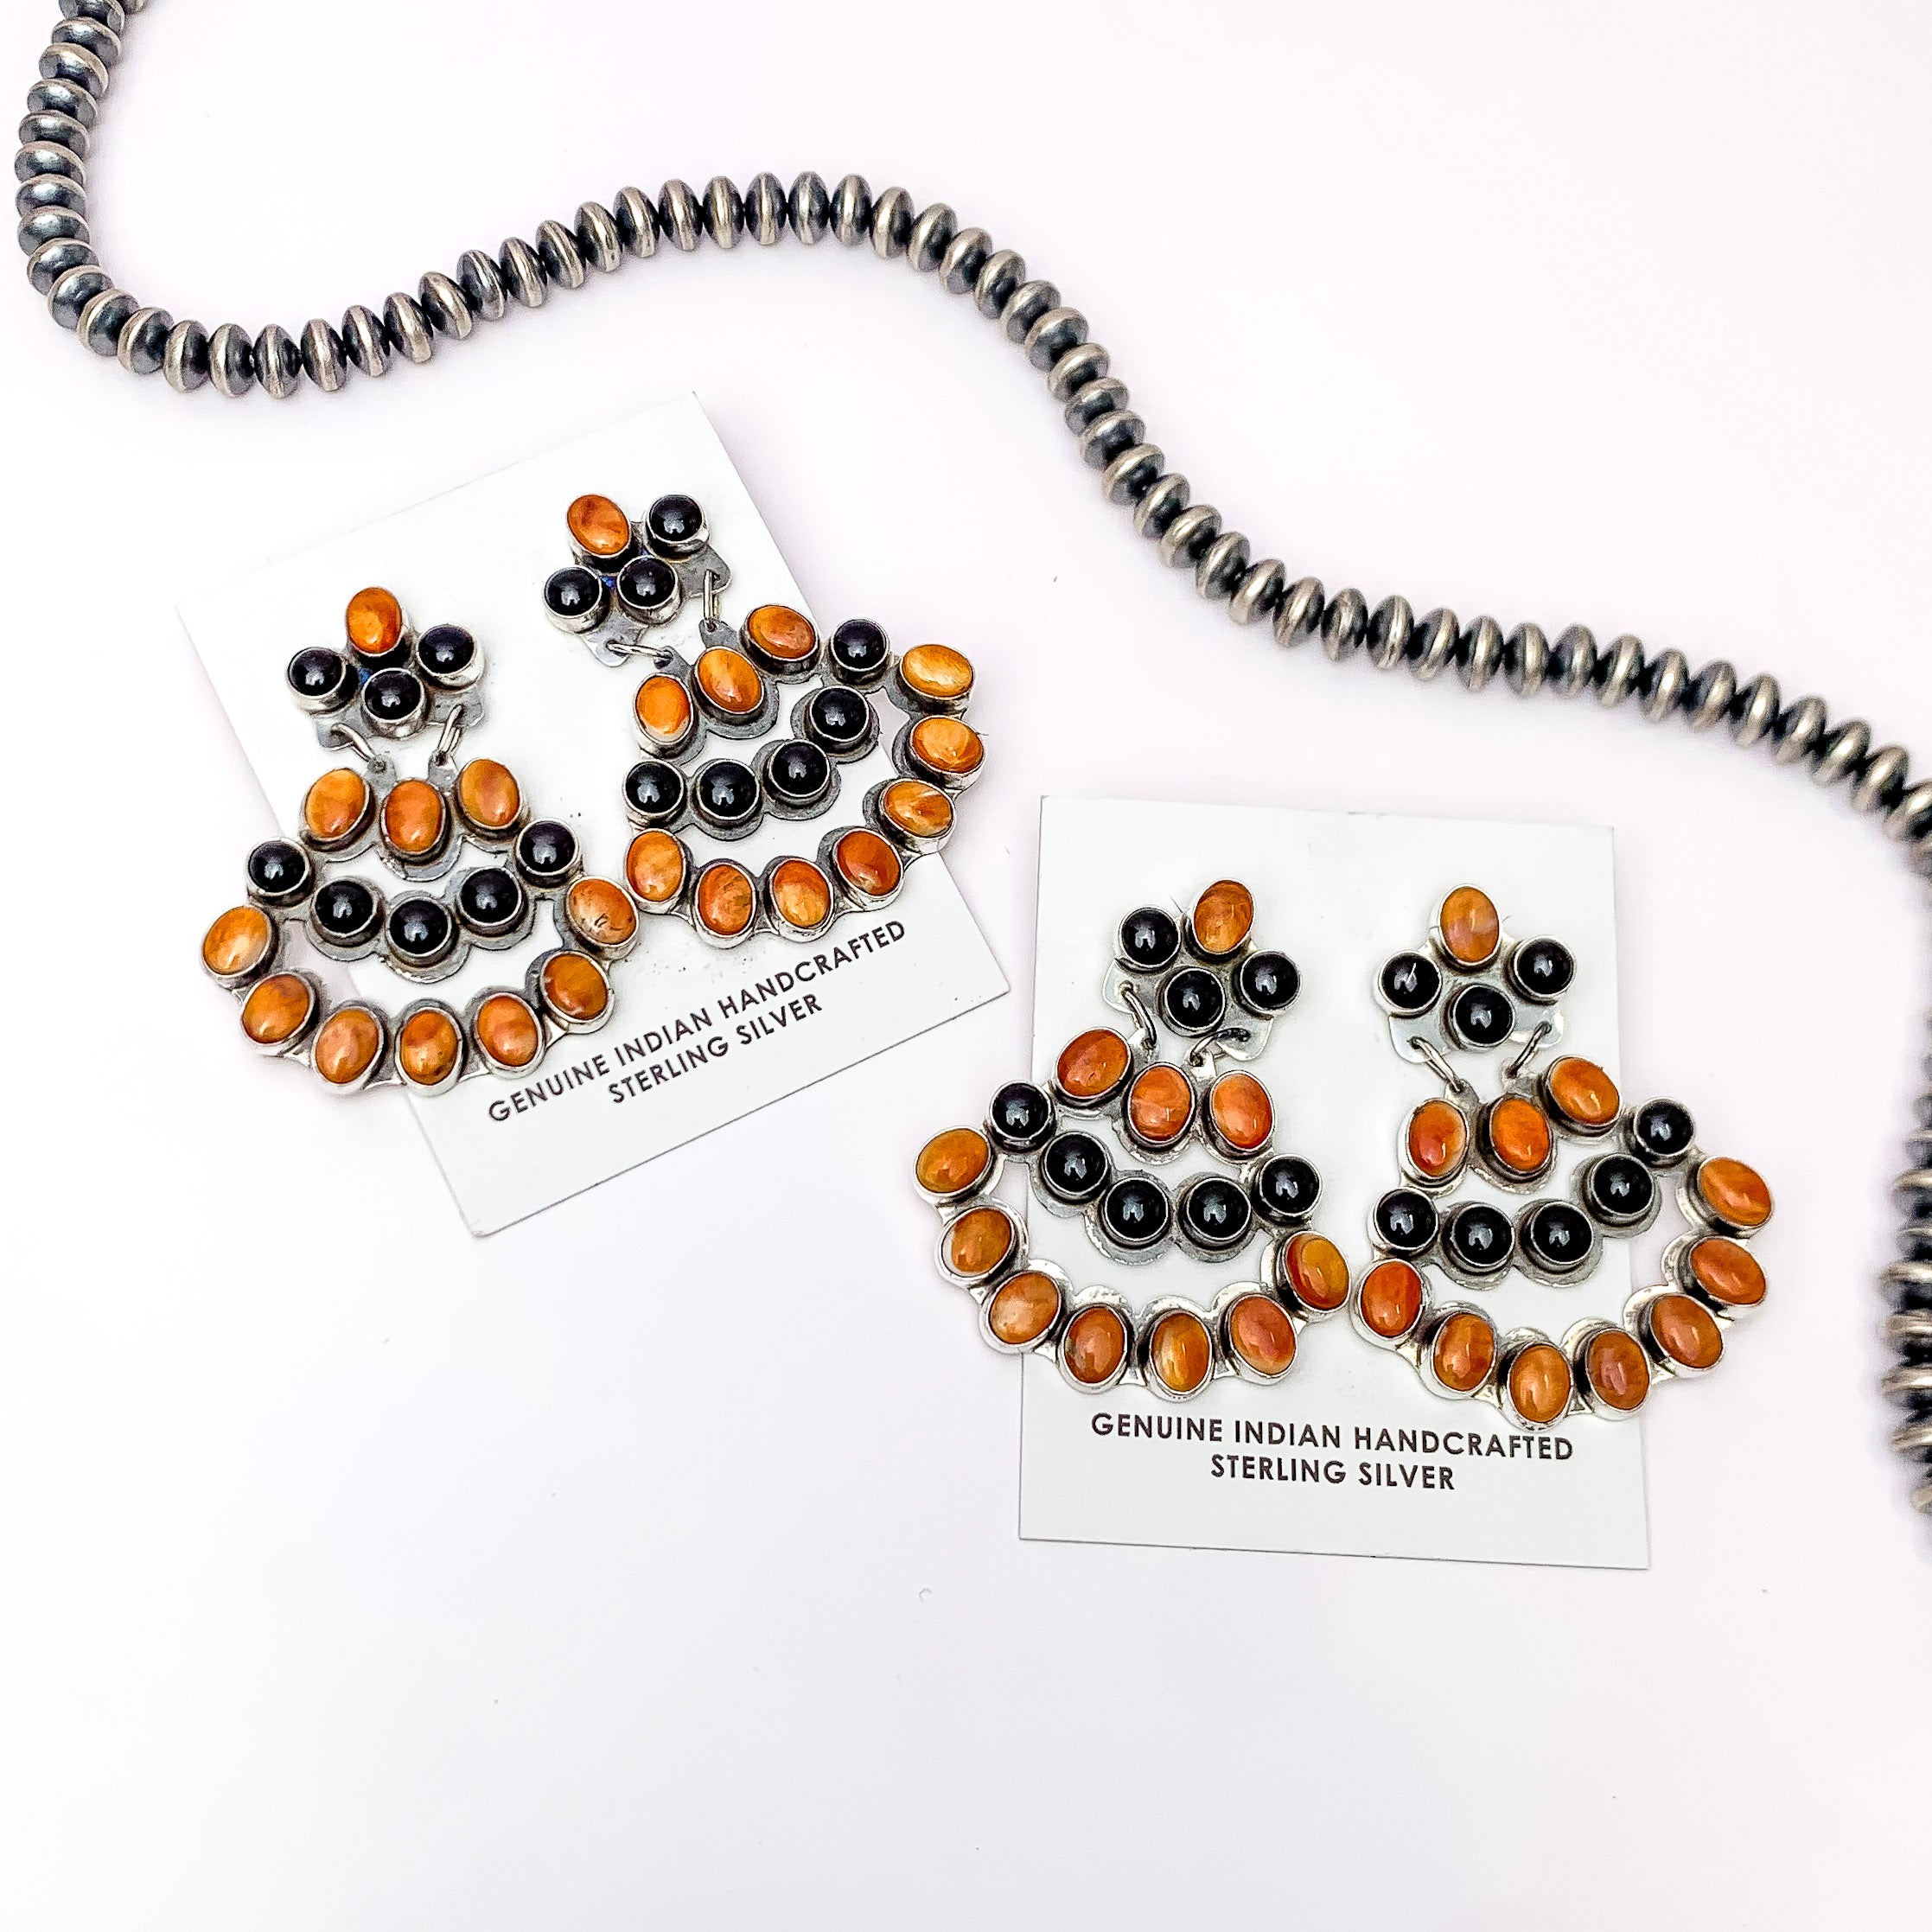 Centered in the picture is two pair of orange and black drop earrings on a white. 